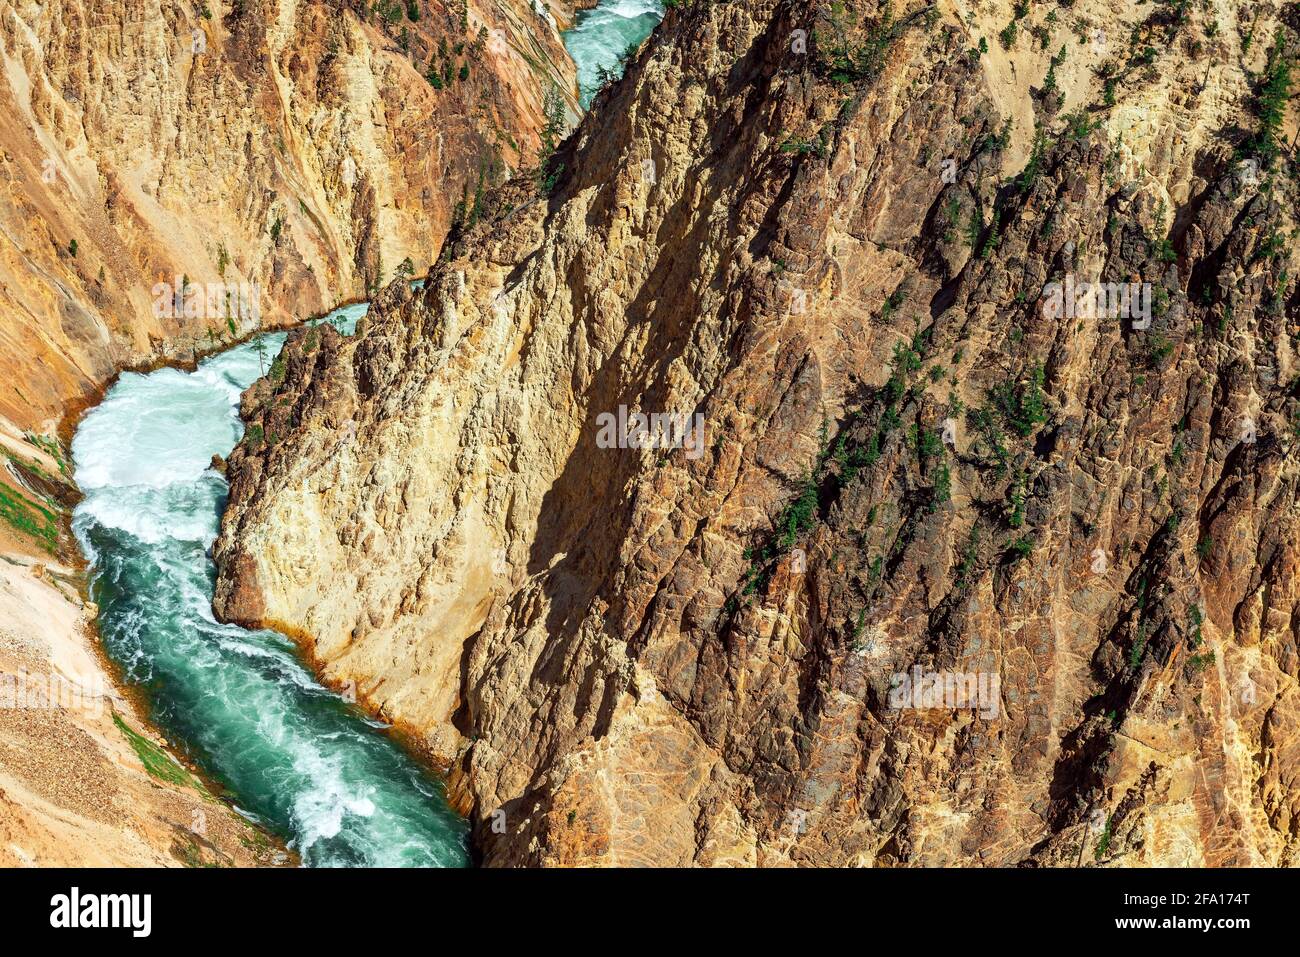 Turquoise Yellowstone River cutting through the Grand Canyon of Yellowstone with yellow and red colors, Yellowstone national park, Wyoming, United Sta Stock Photo